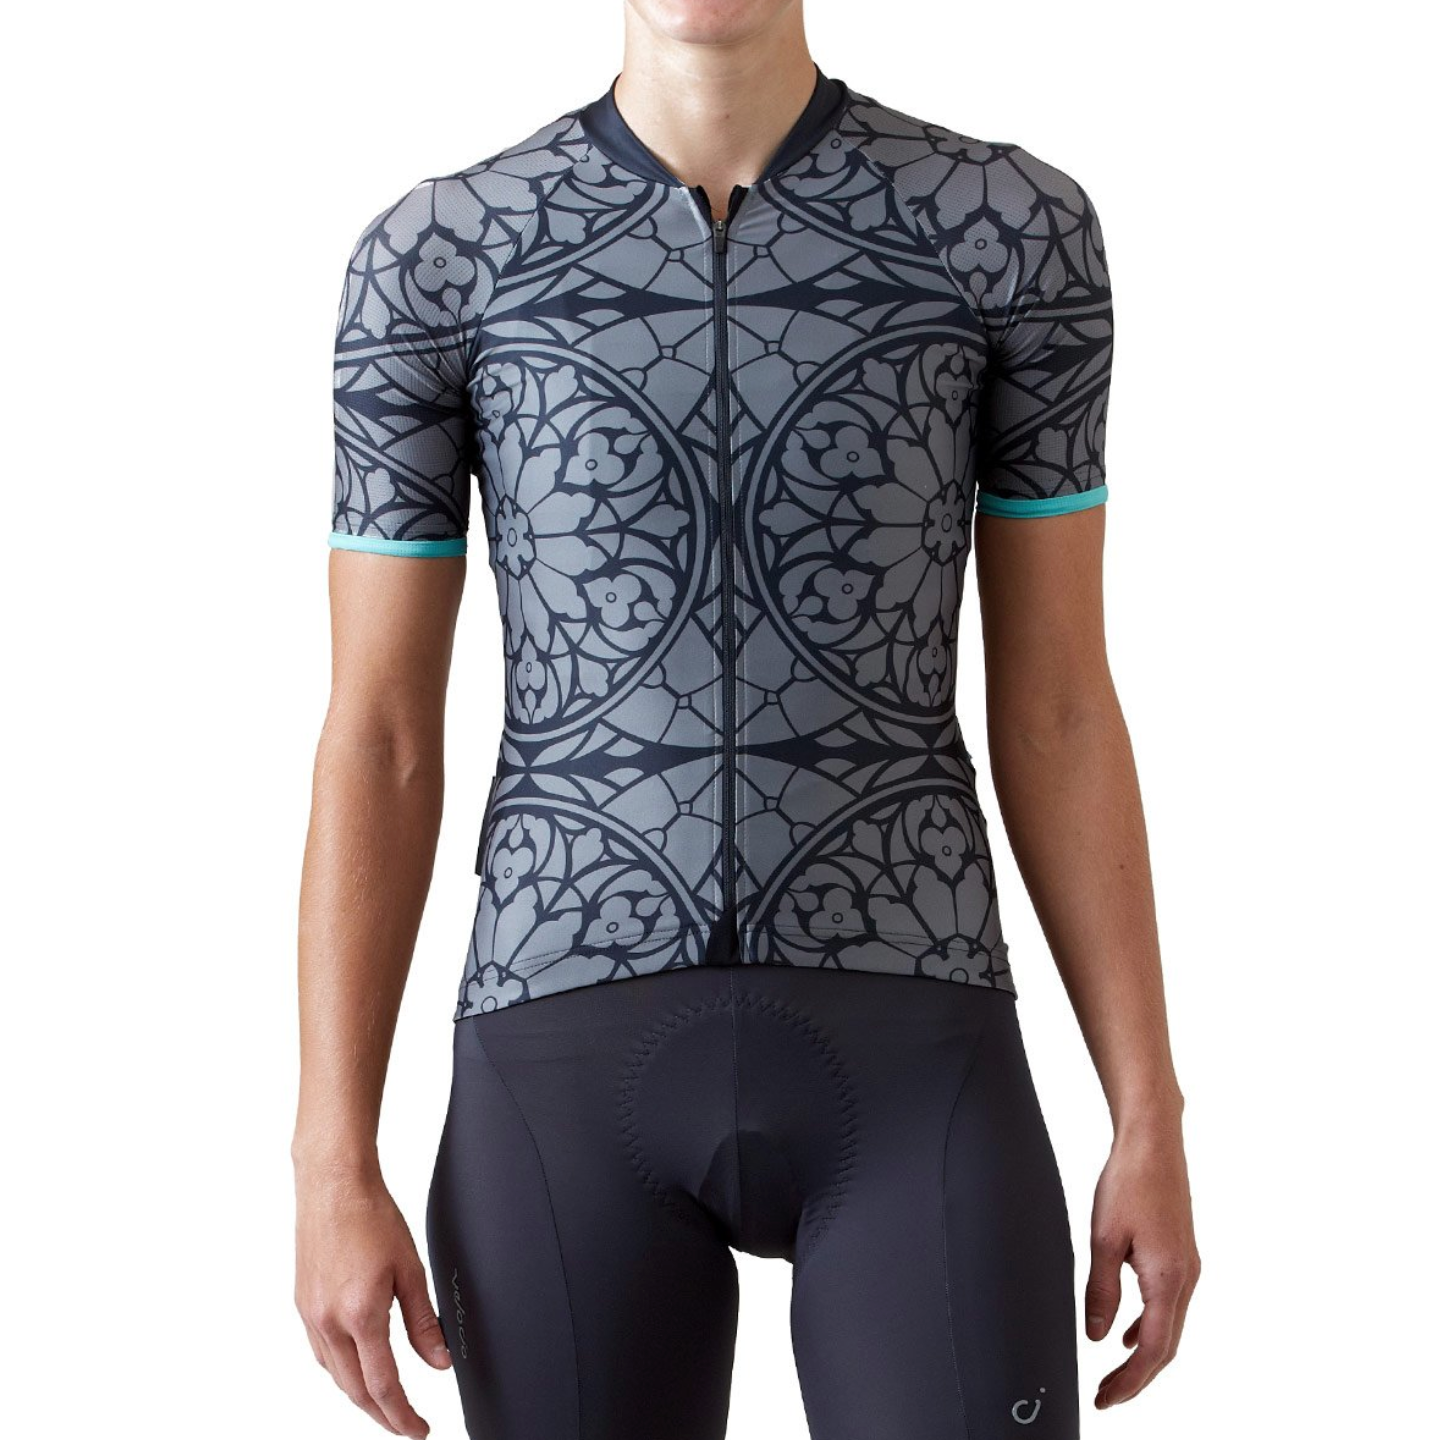 VELOCIO WOMENS JERSEY ES STAINED GLASS - 3 COLOURS TO CHOOSE CYCLING SYDNEY AUSTRALIA BIKE SHOP